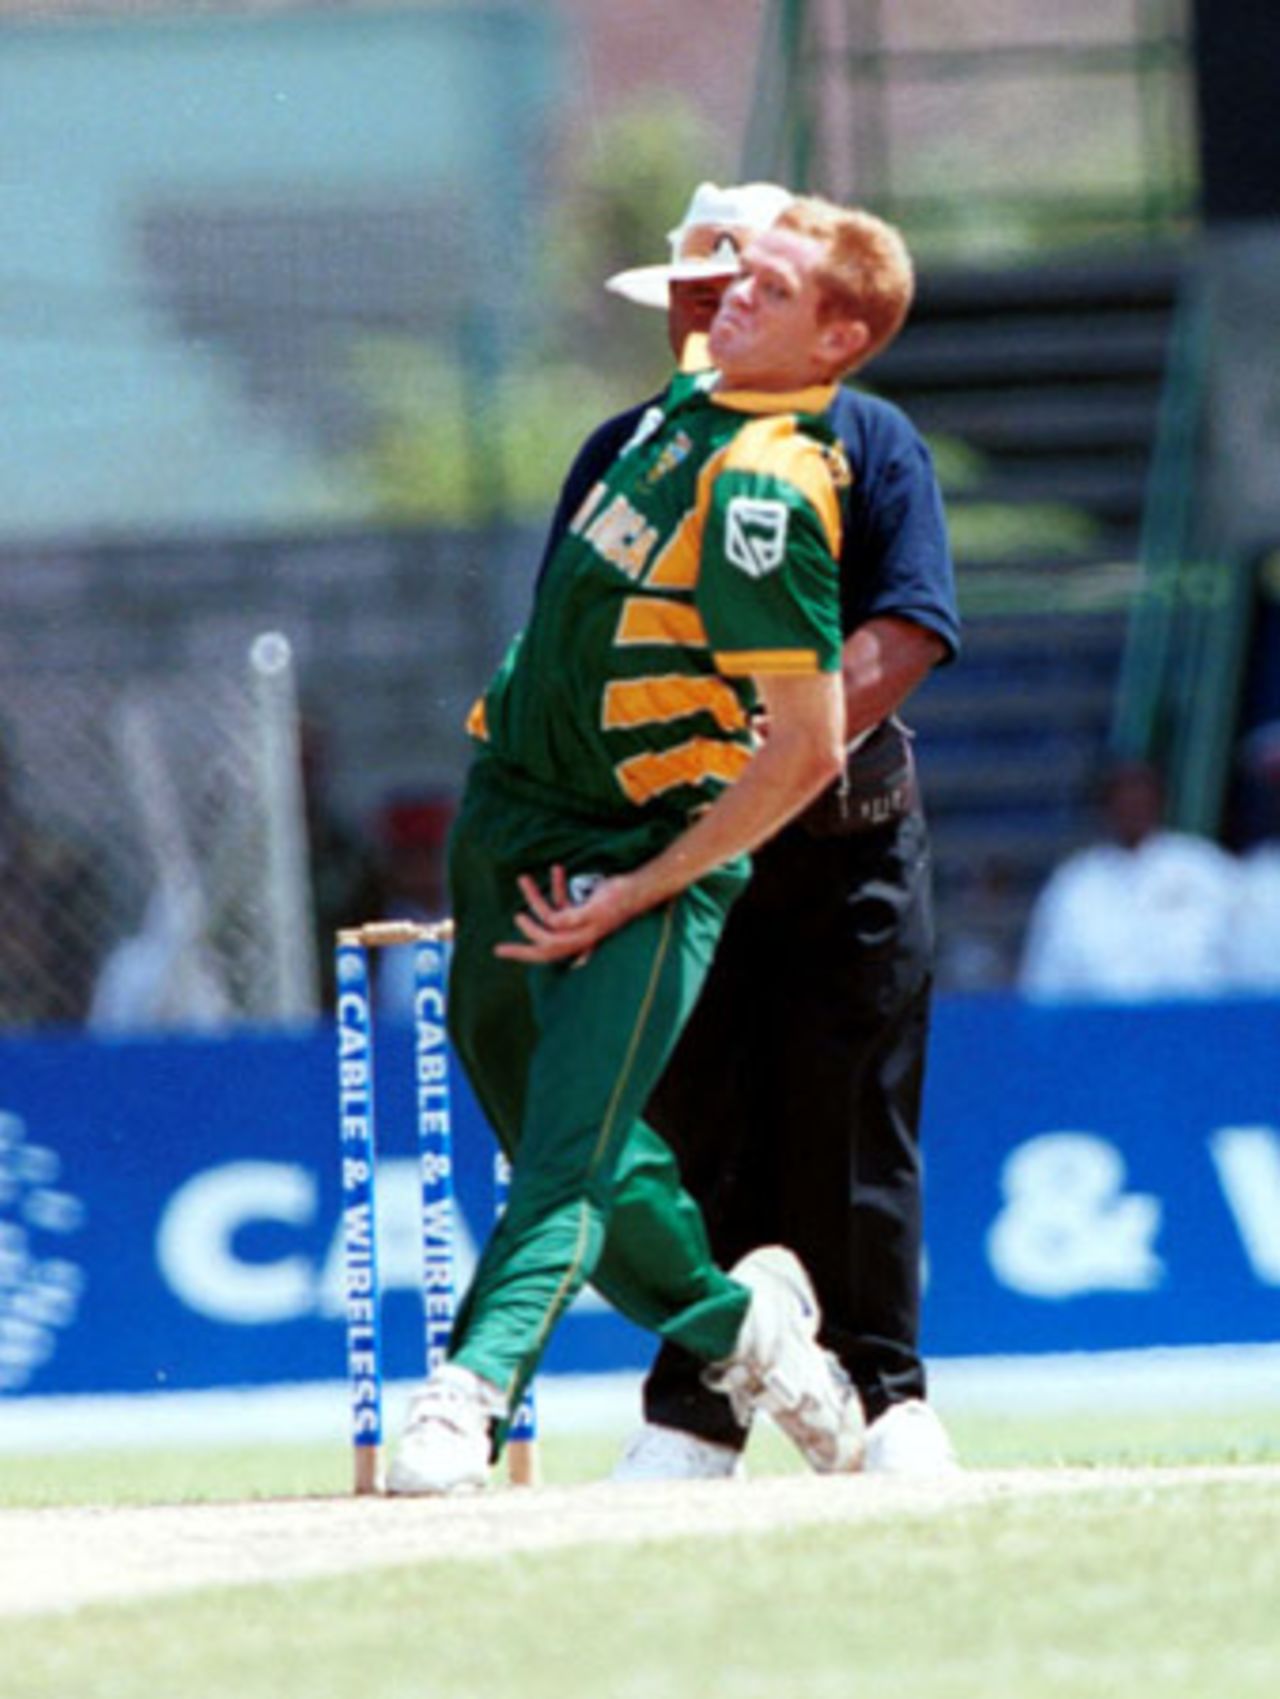 Skipper Shaun Pollock in action, West Indies v South Africa, 4th ODI at Queen's Park (New) St George's, Grenada , 6th May 2001